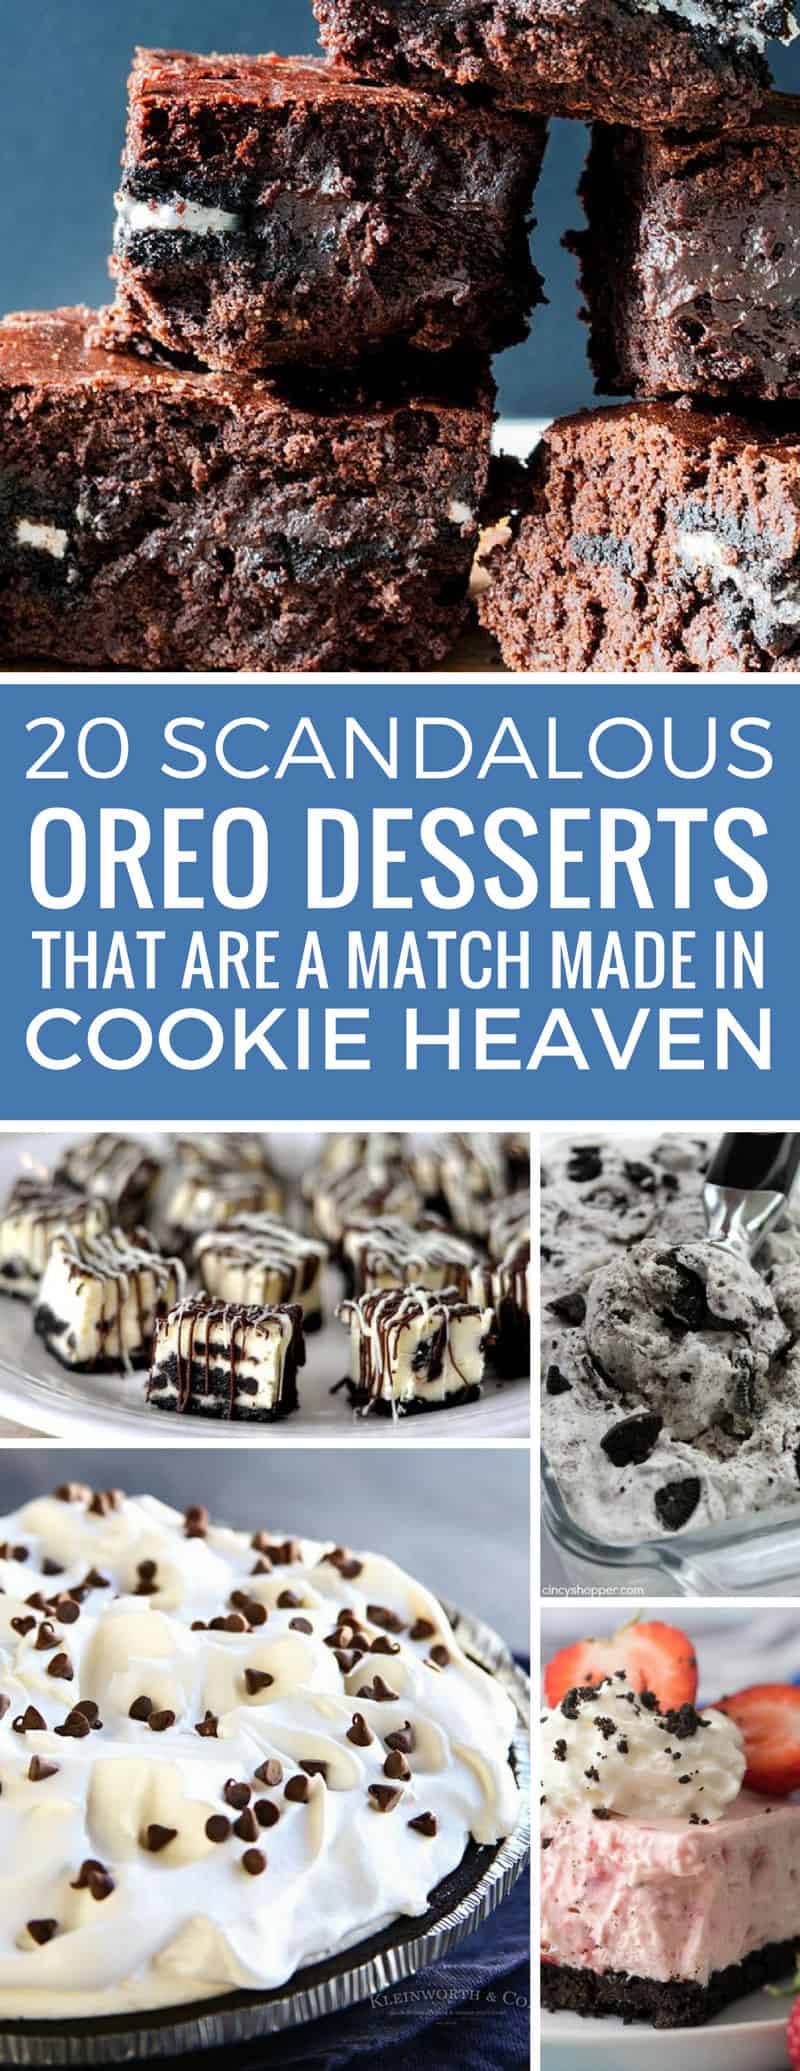 Yum! You just made all my Oreo dreams come true with these dessert recipes! Thanks for sharing!